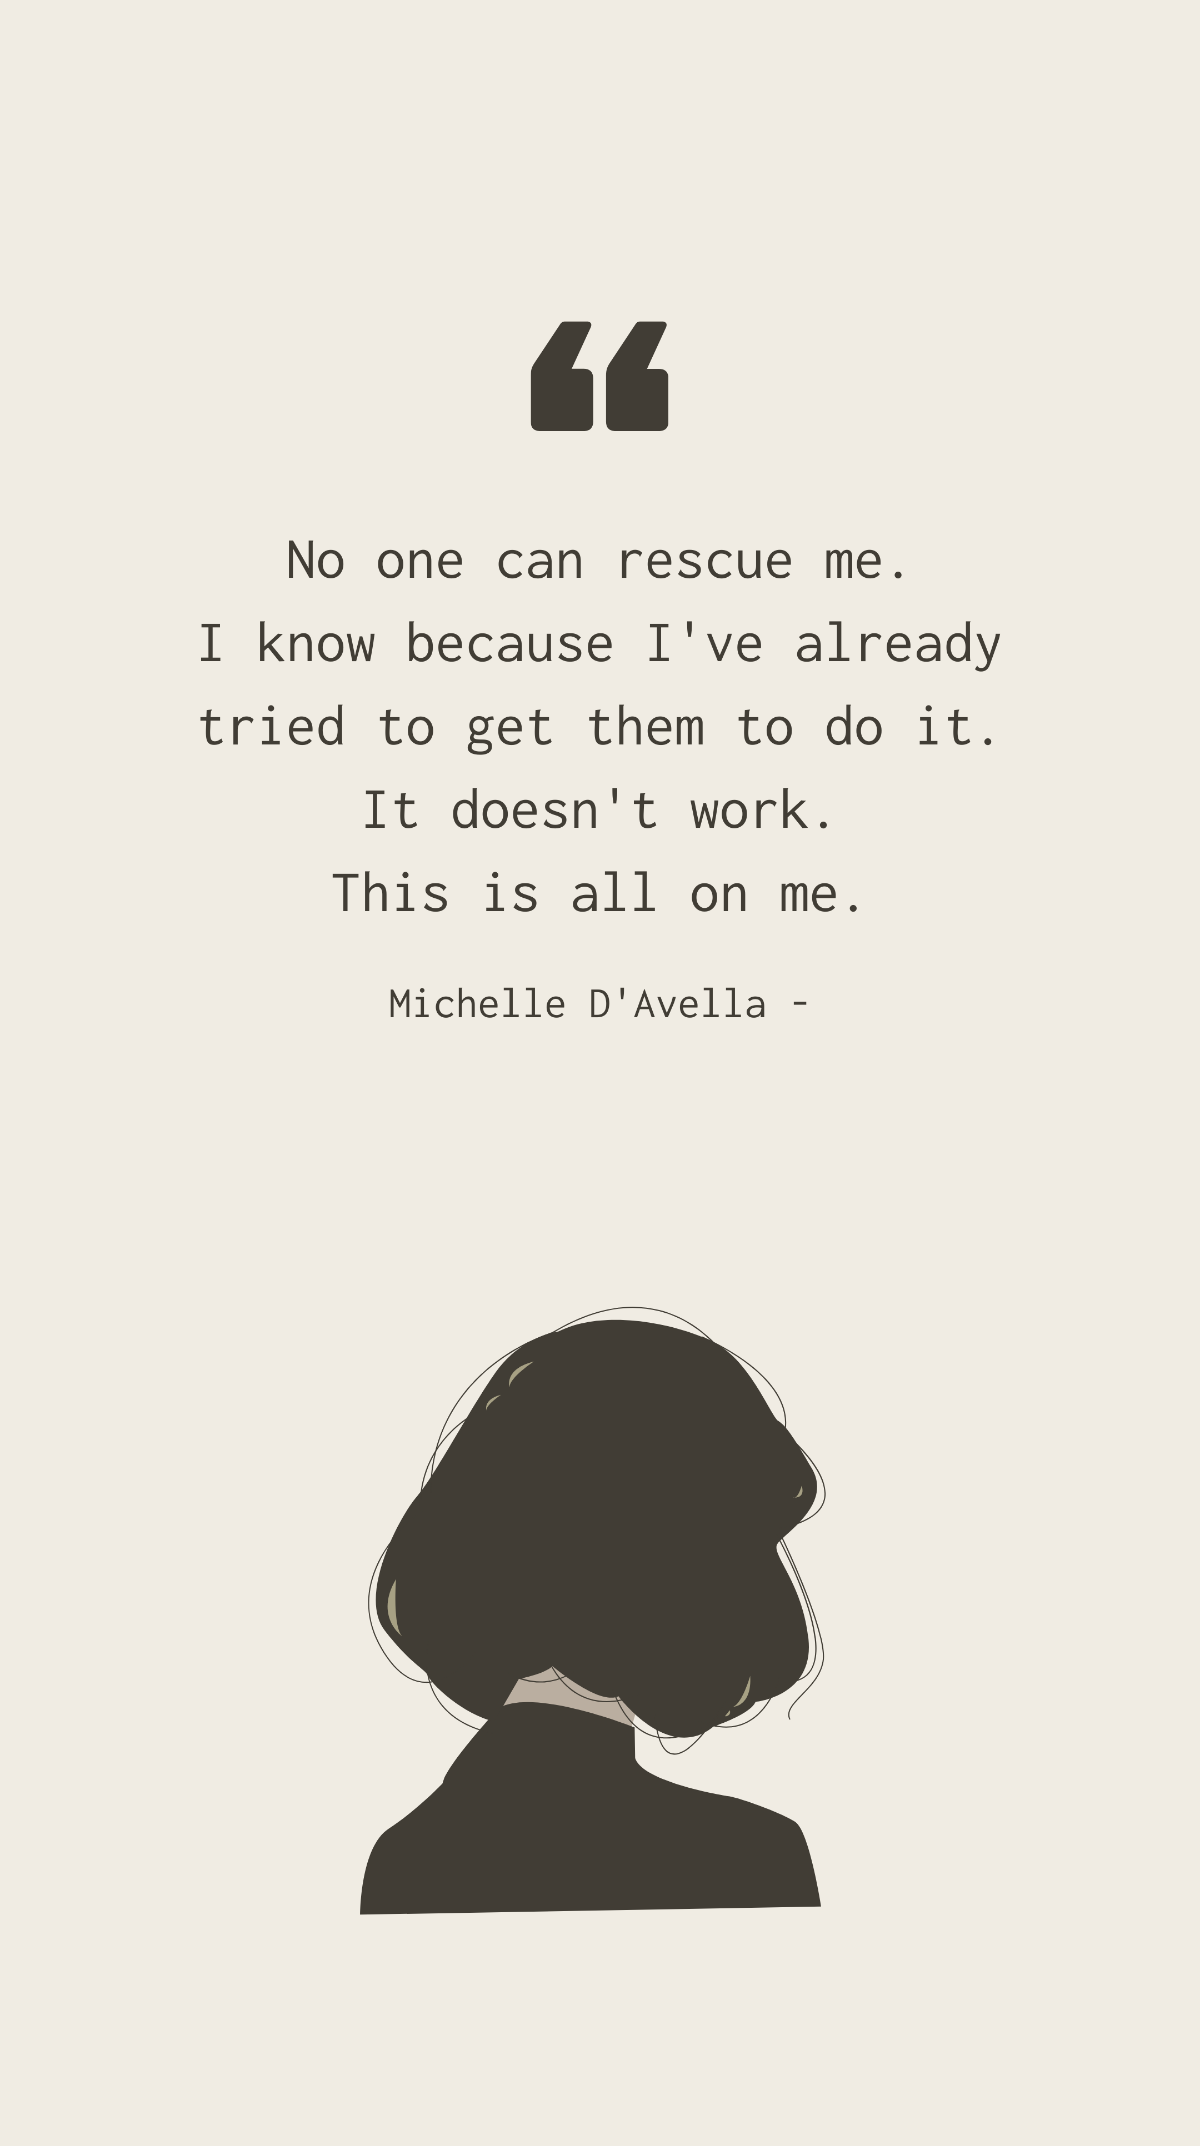 Michelle D'Avella - No one can rescue me. I know because I've already tried to get them to do it. It doesn't work. This is all on me. Template